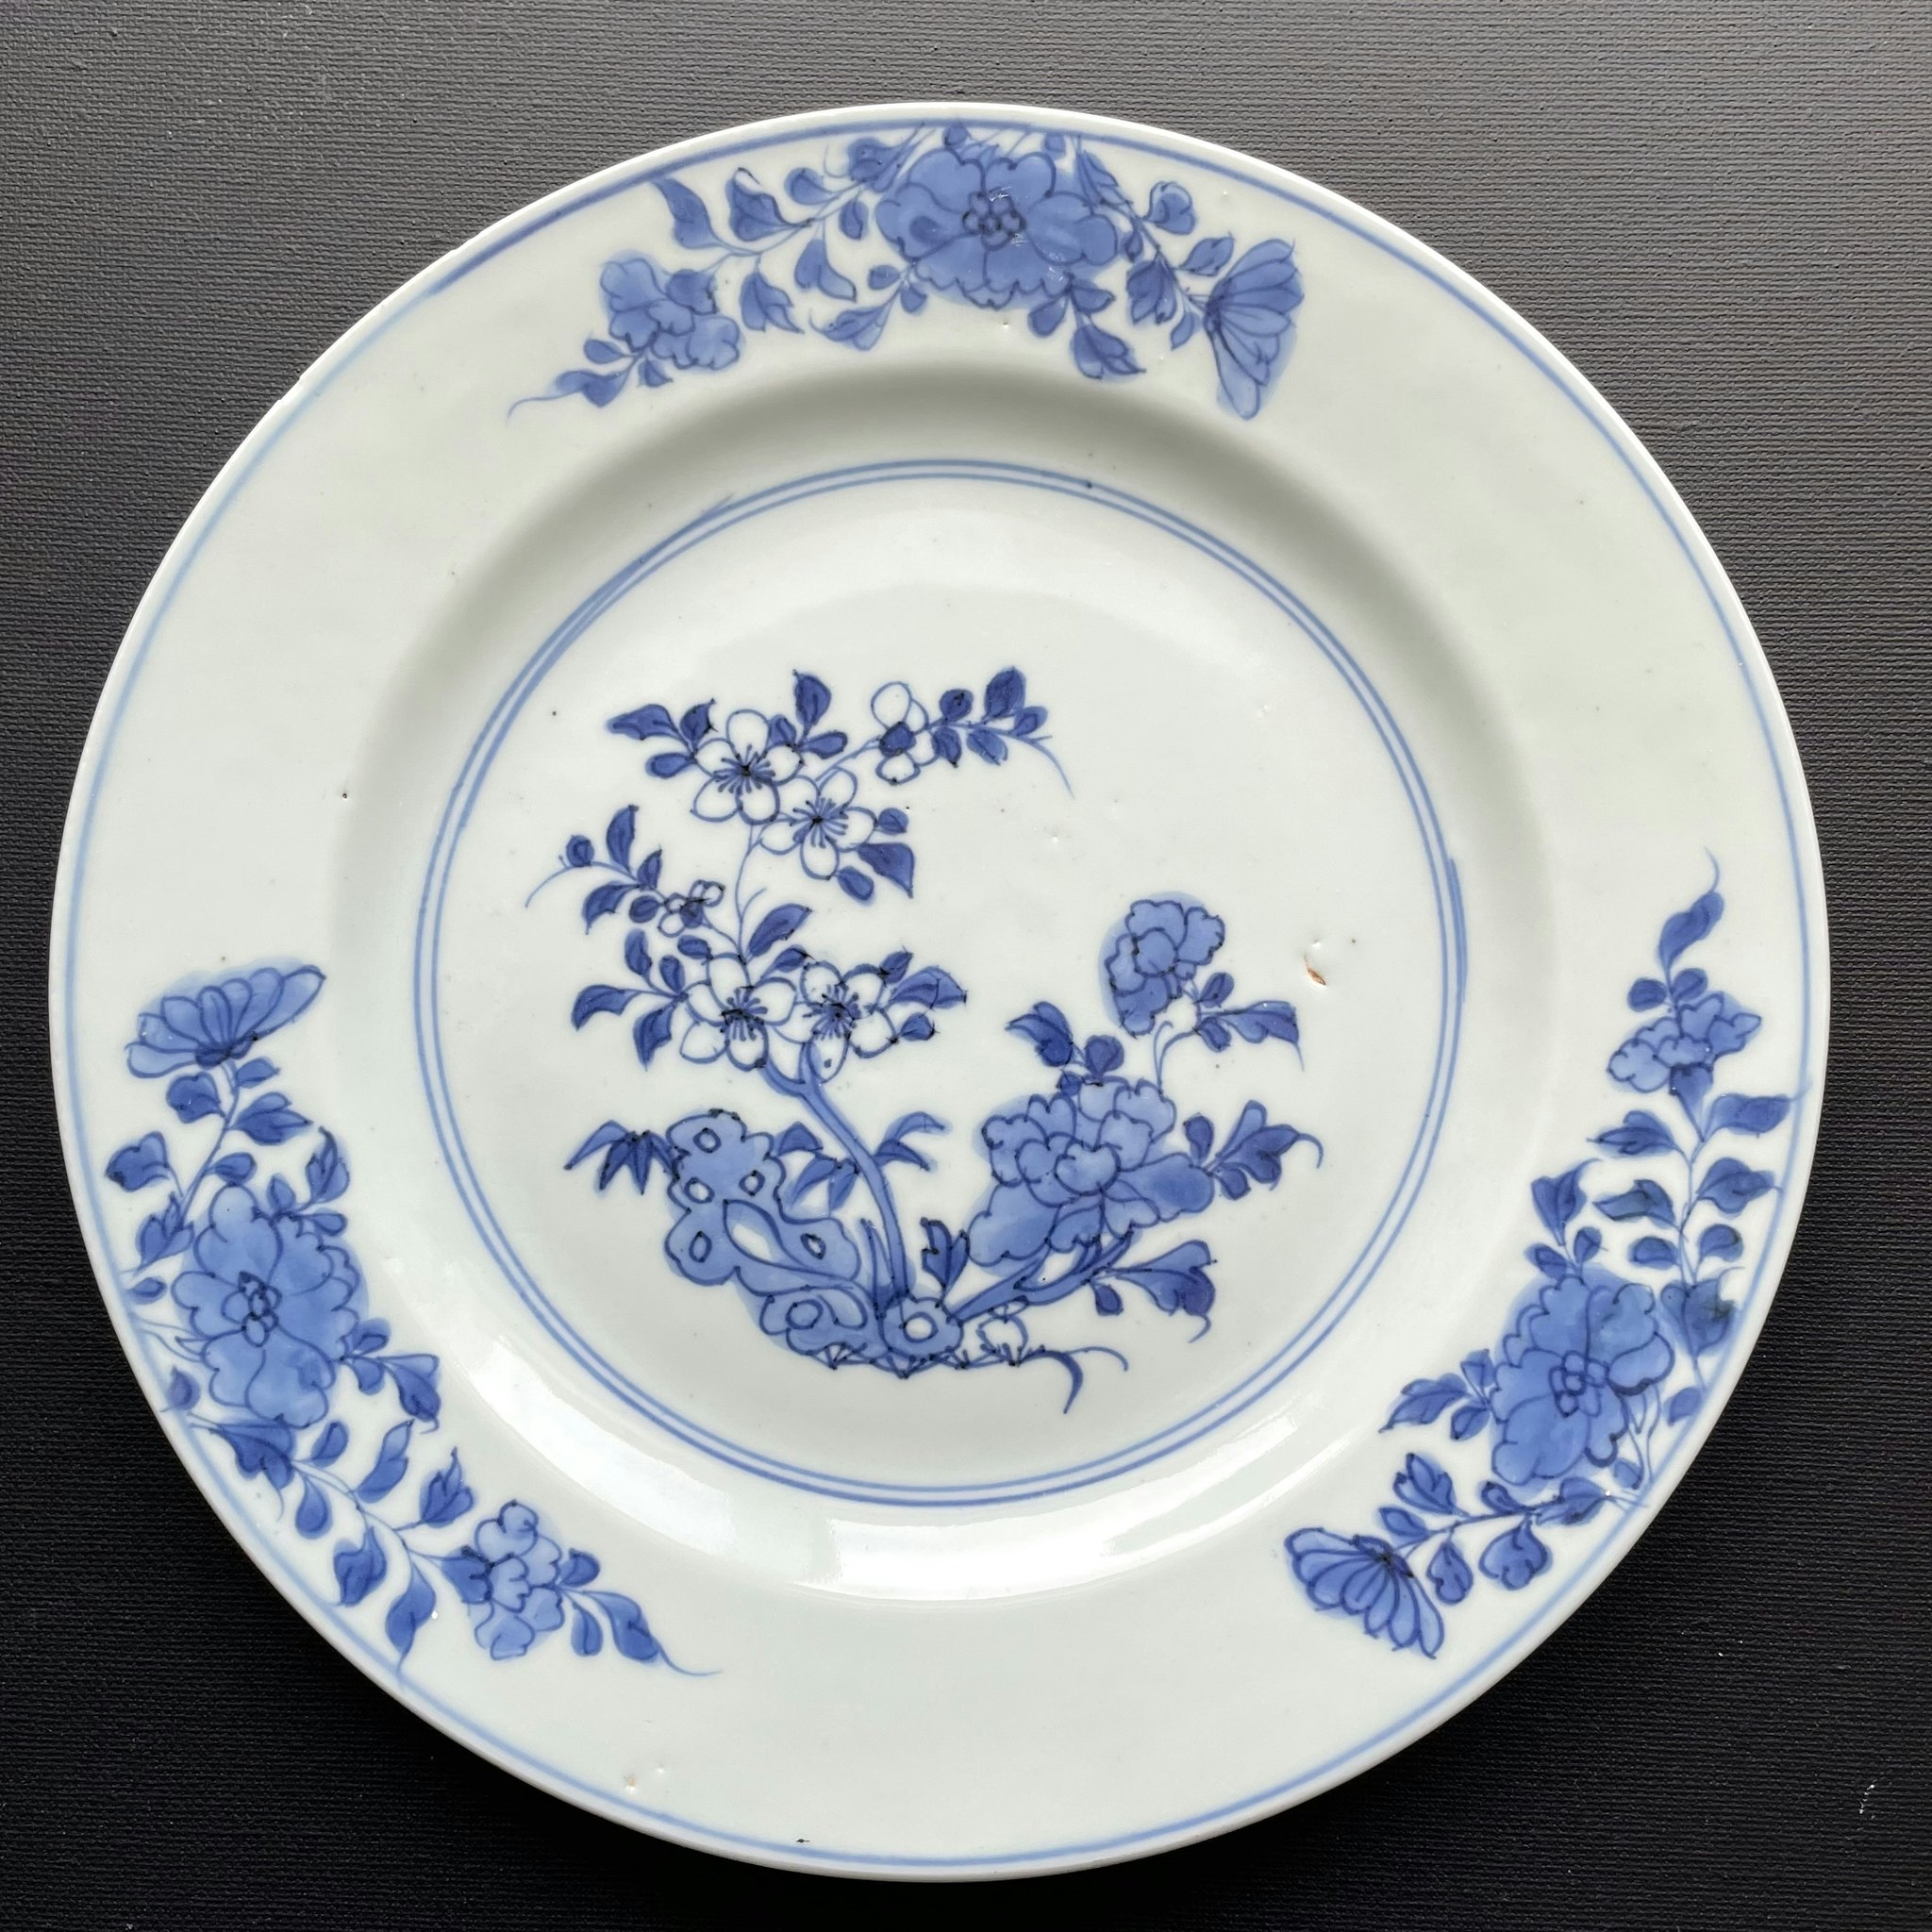 Antique Chinese Export Blue and White Porcelain plate, Qianlong period #1028